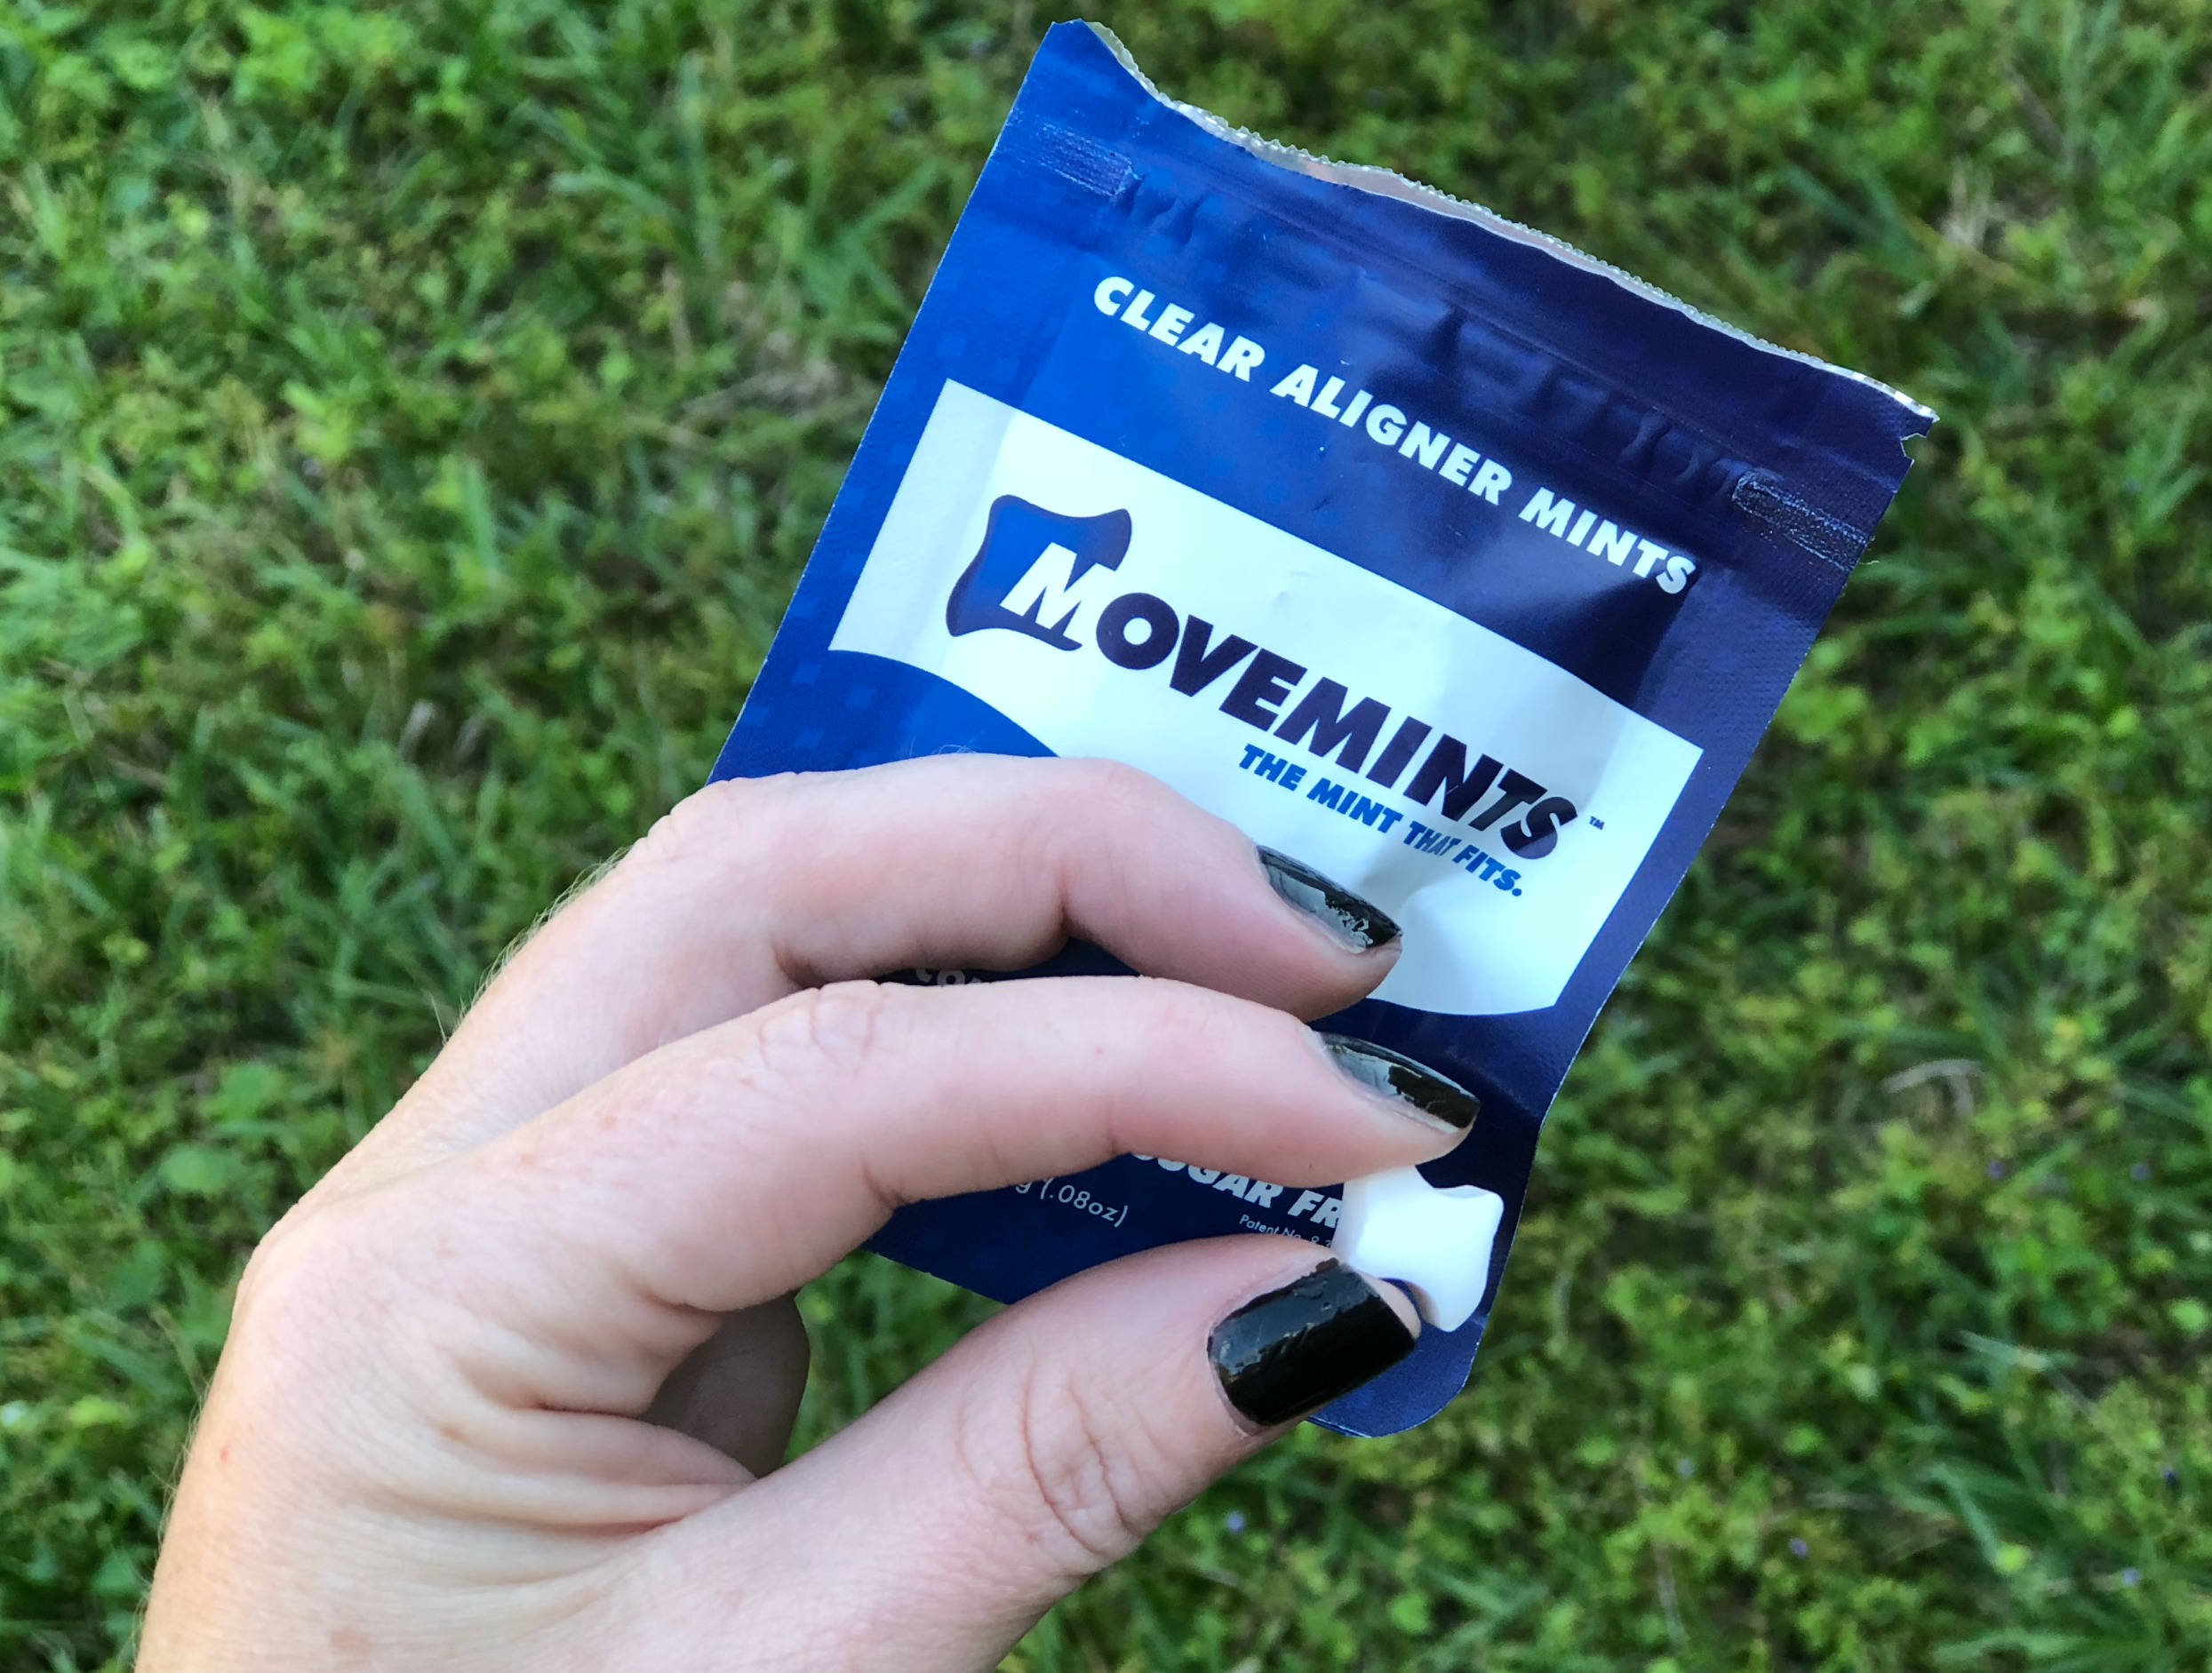 Why I Love Movemints Clear Aligner Mints and an Amazon Gift Card Giveaway!